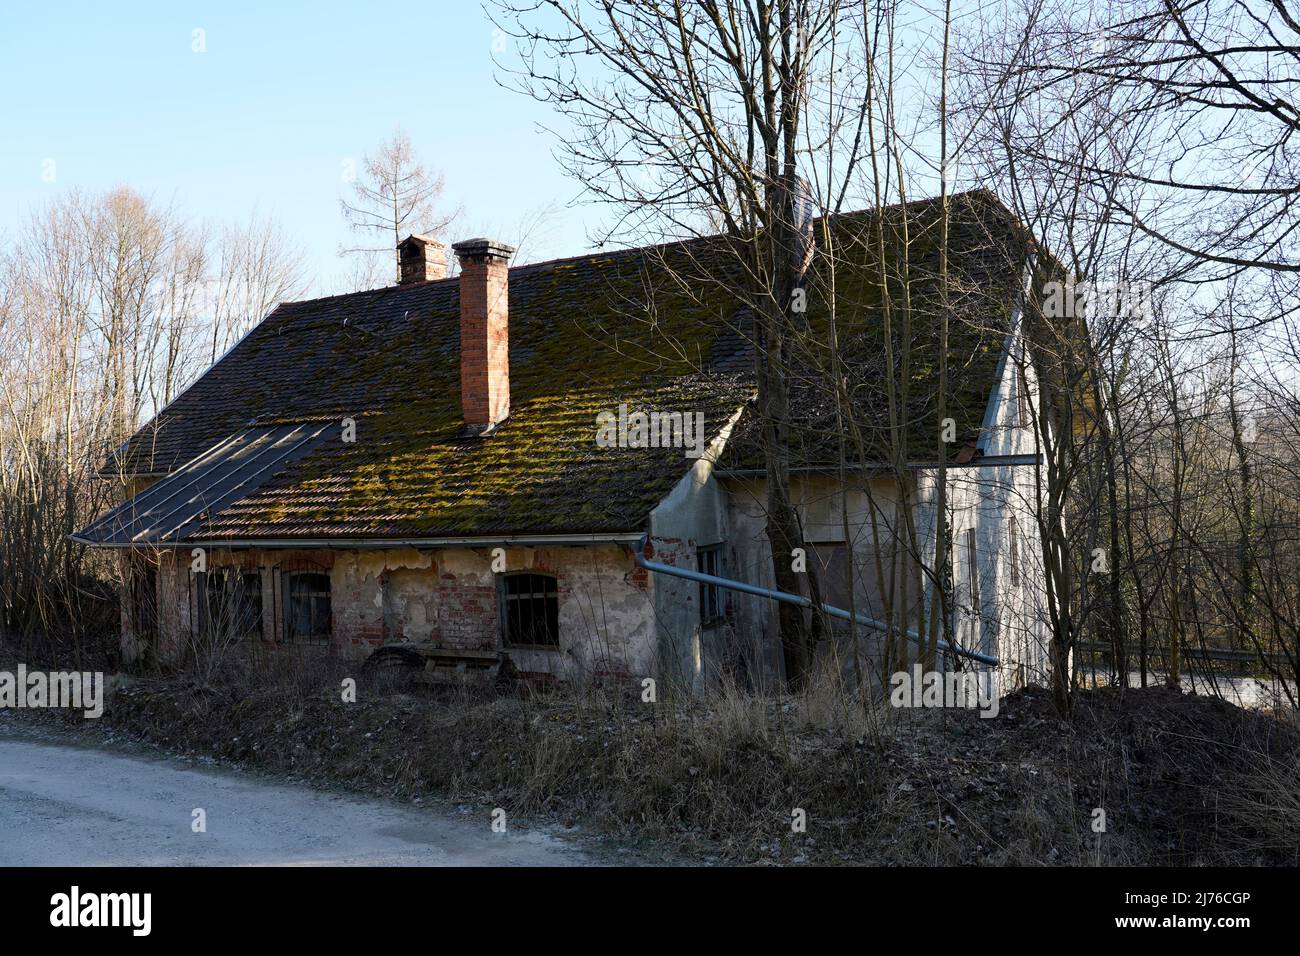 Germany, Bavaria, Upper Bavaria, Altötting district, old country house, vacant, dilapidated Stock Photo